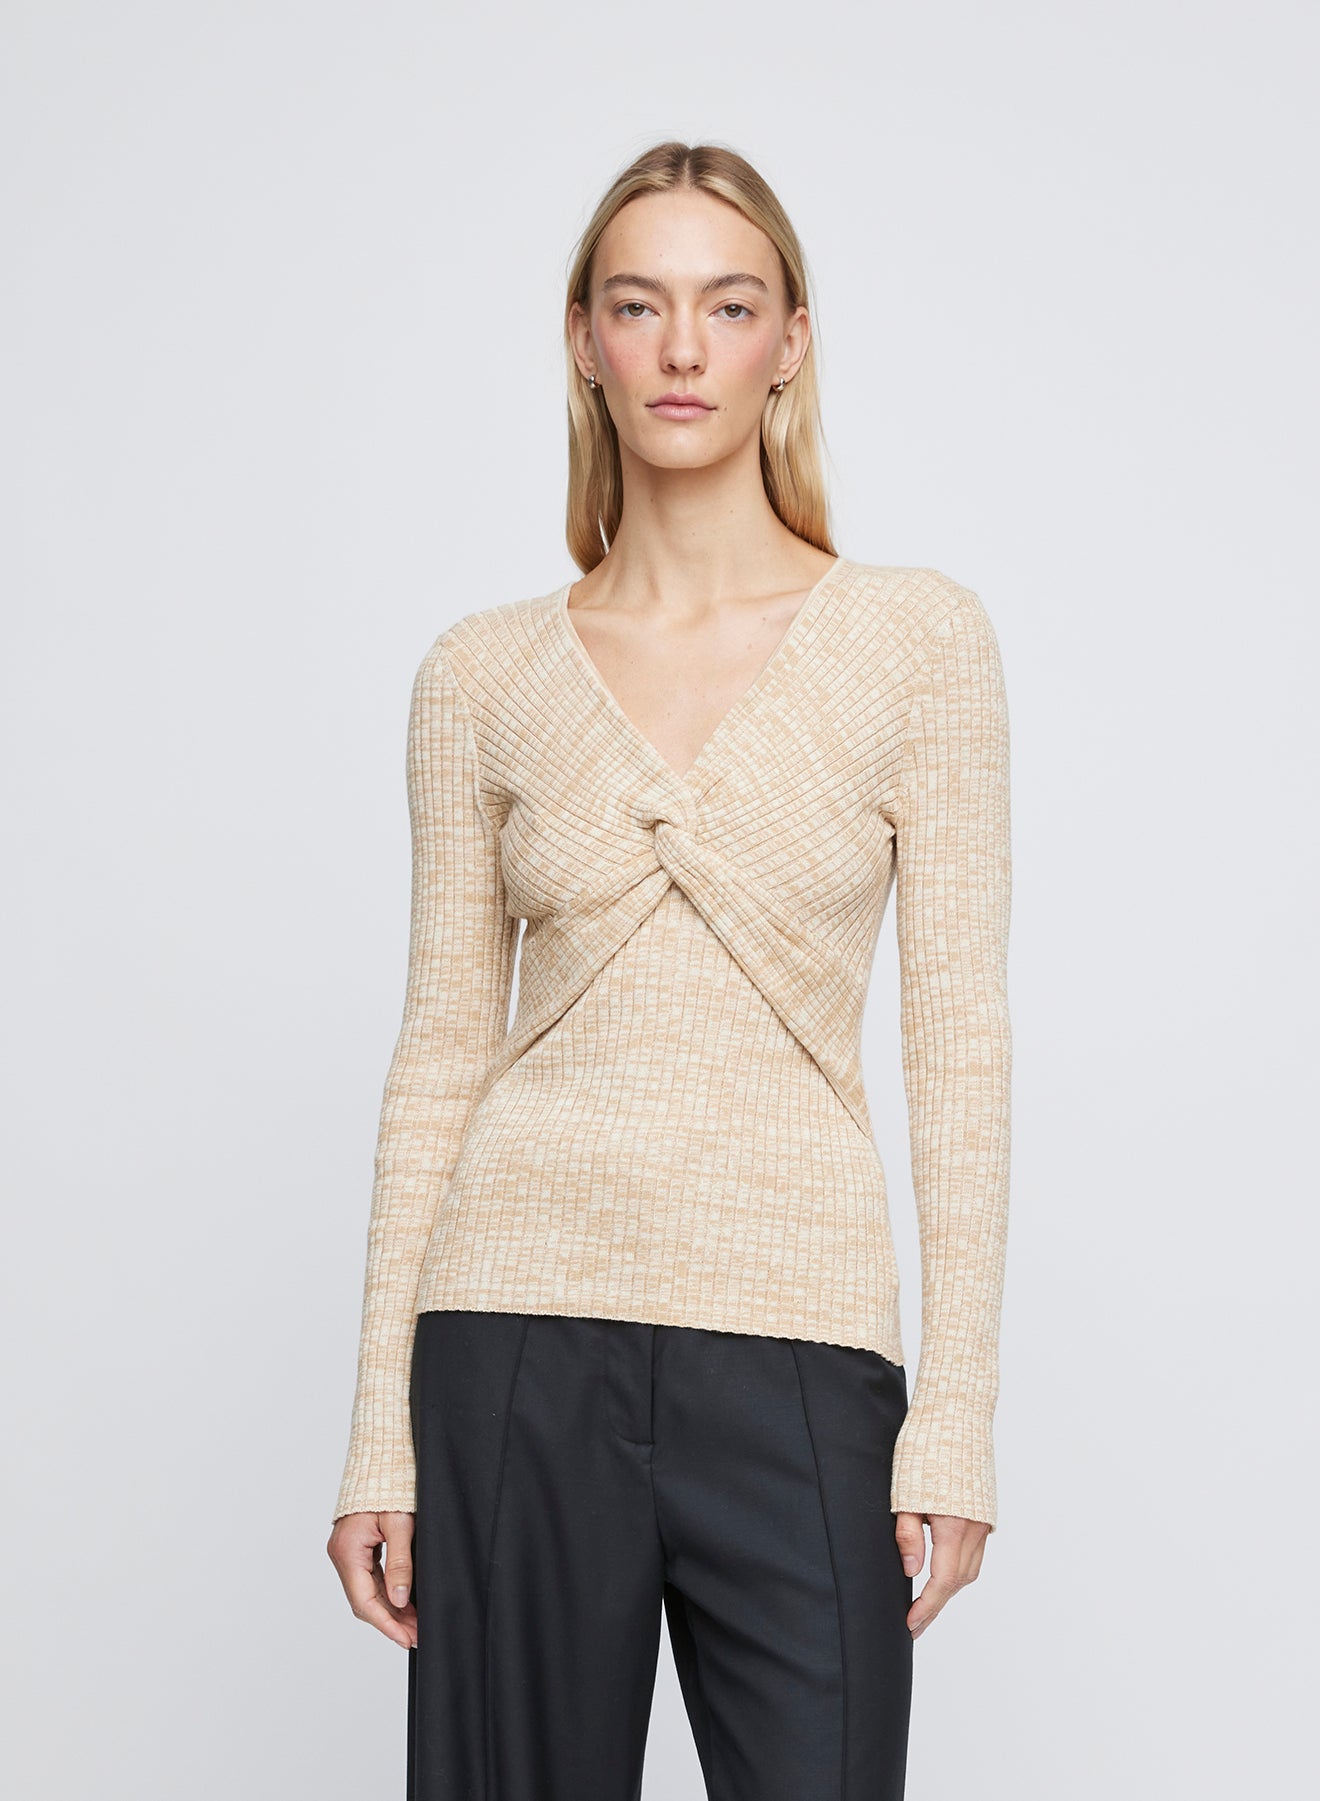 The ANNA QUAN Luna Top in Sand Dune is a long sleeve knit featuring a centre front twist and deep v neckline.